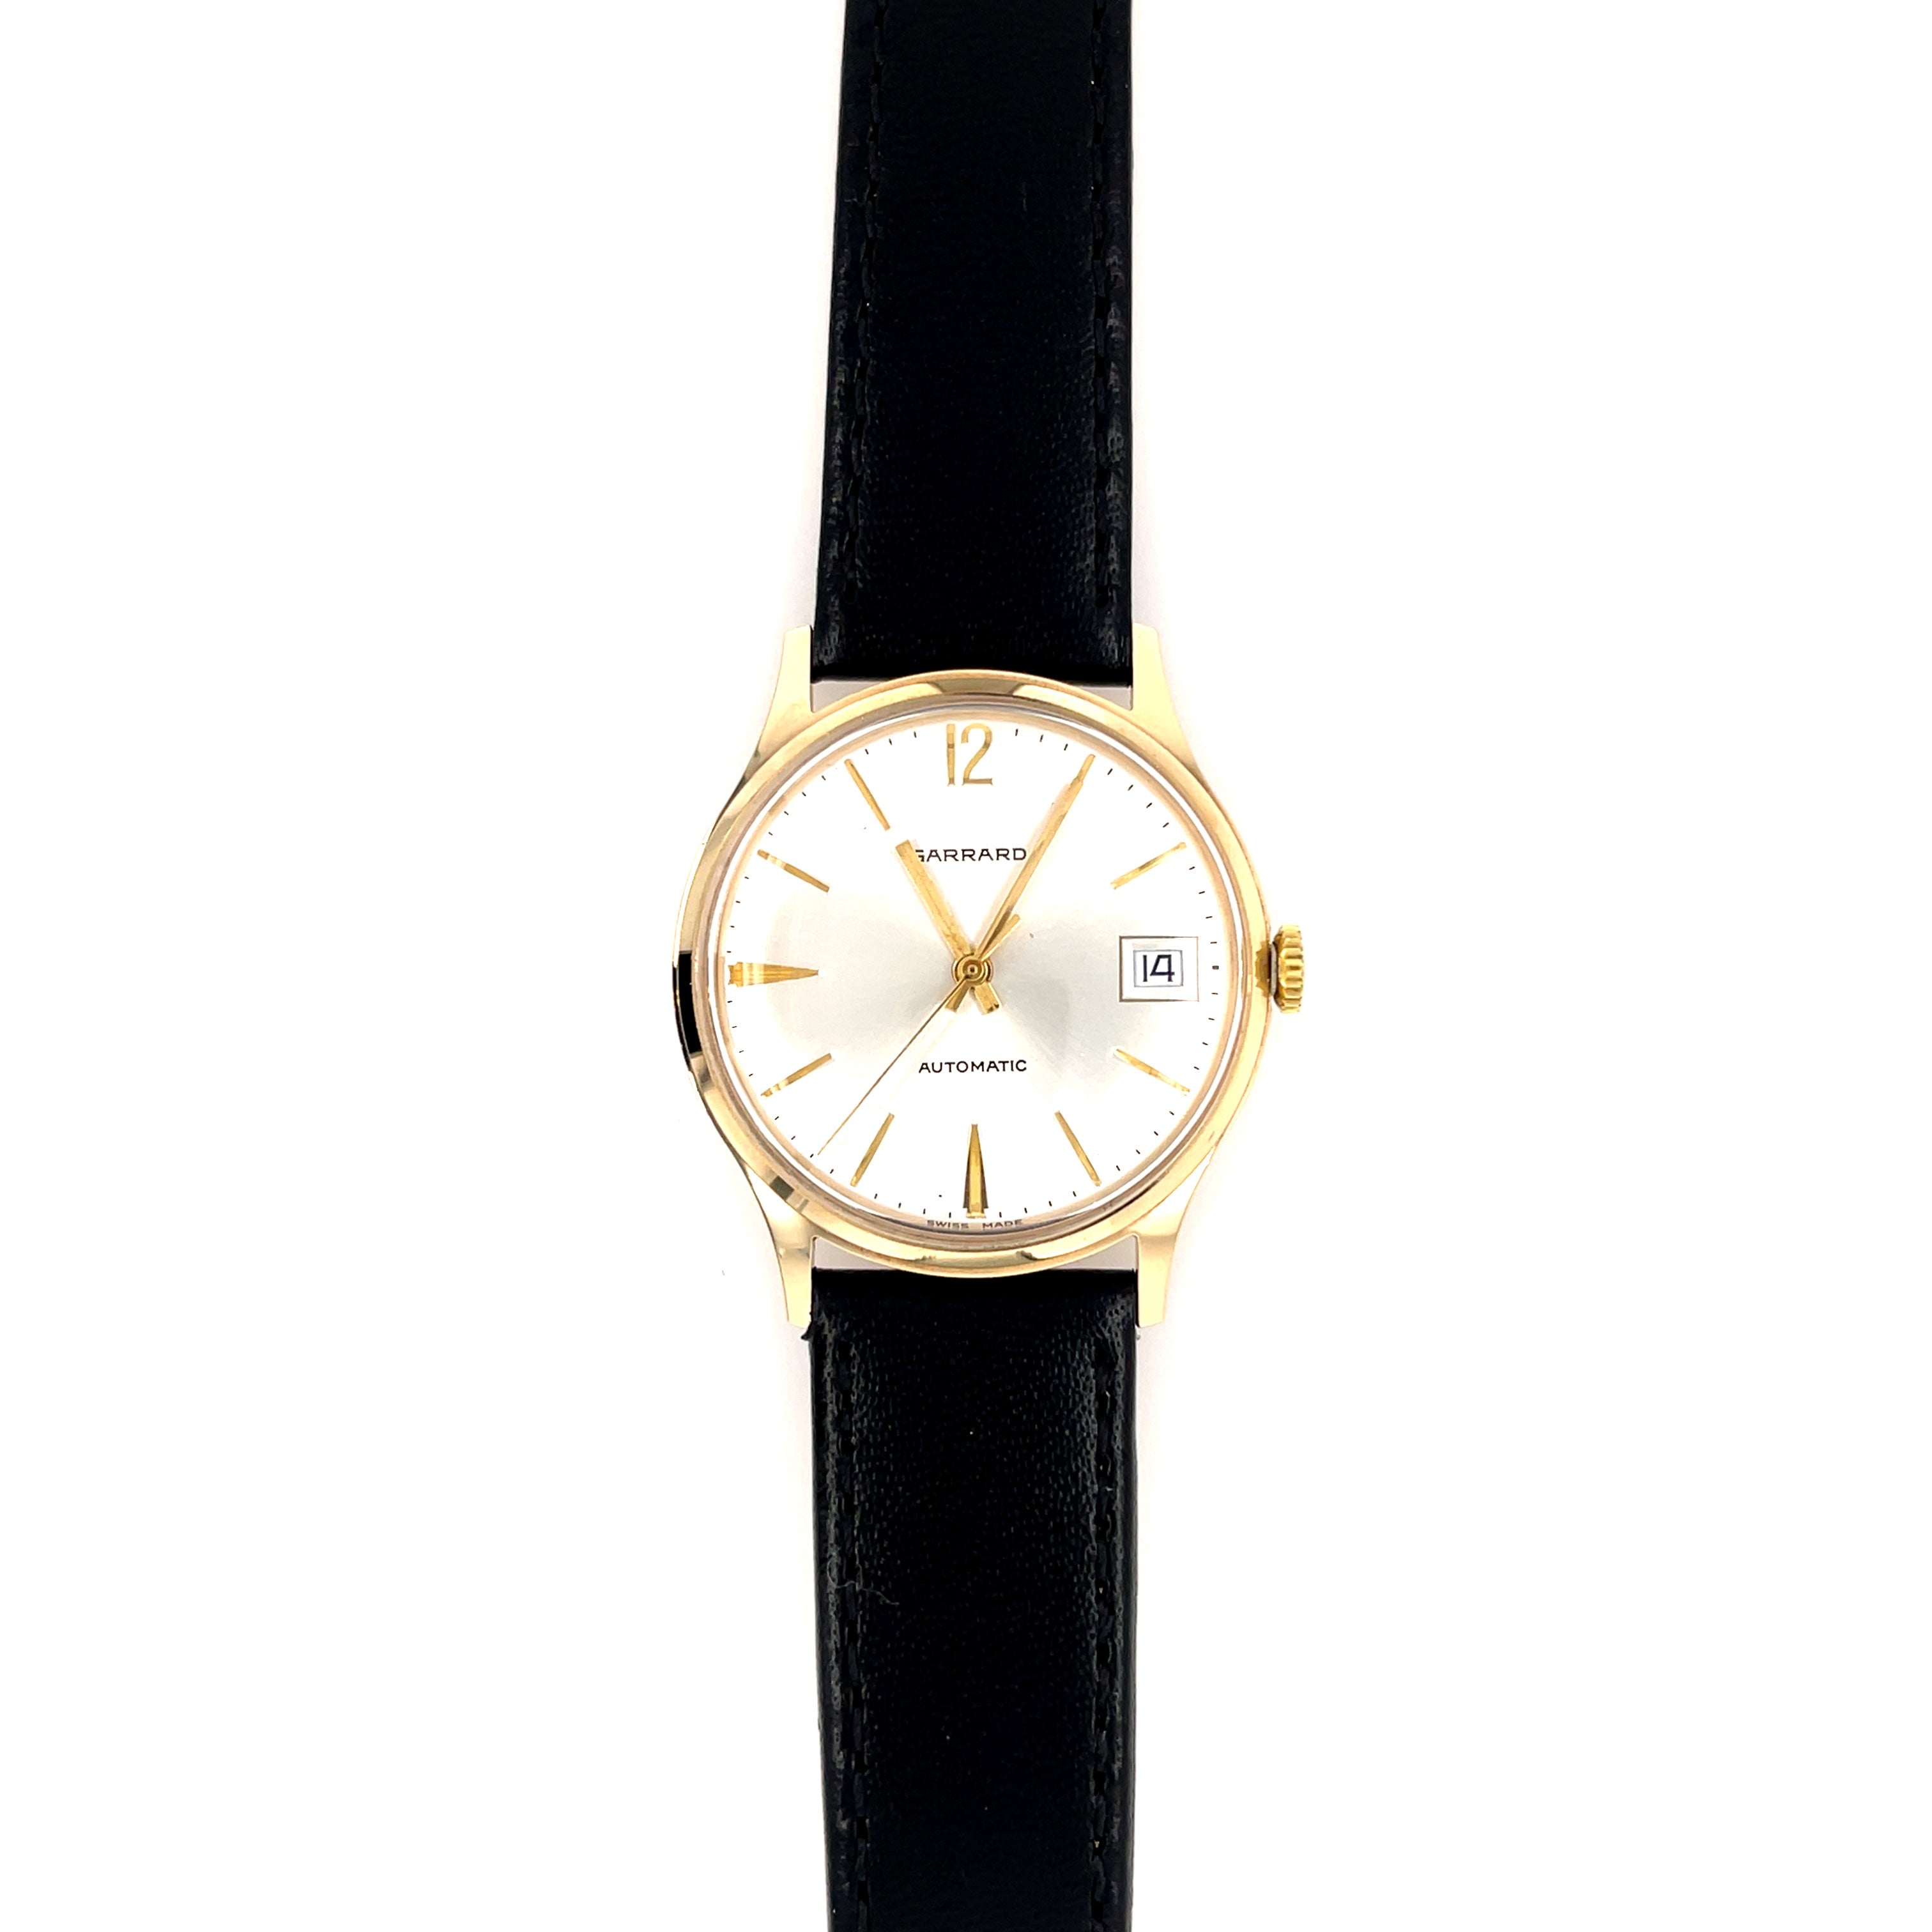 GARRARD Automatic 9ct Yellow Gold Vintage Watch Circa 1960s - Serviced SOLD